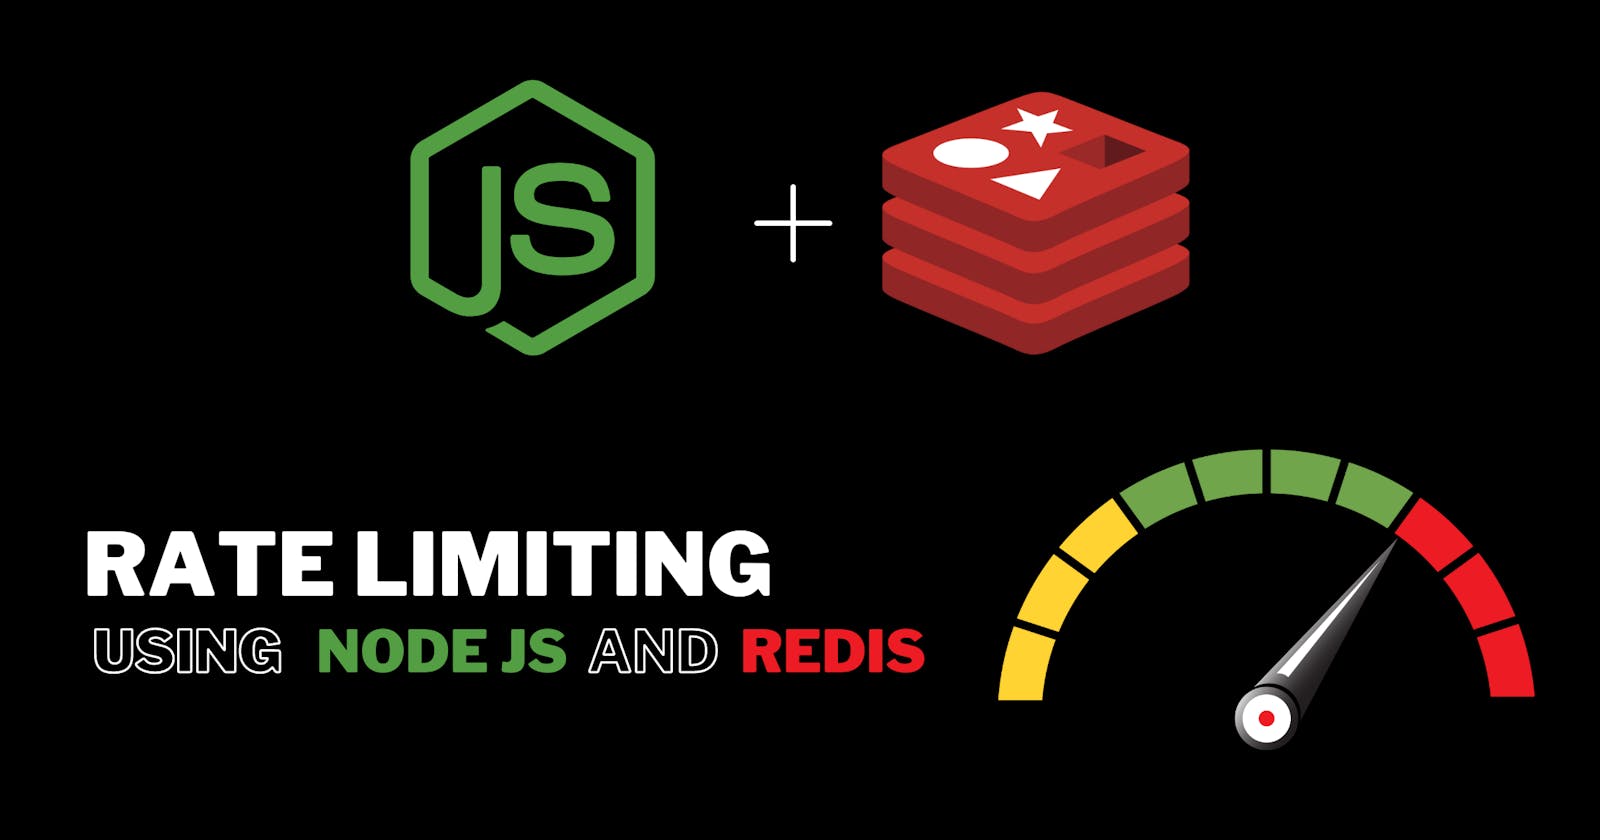 Redis-Based Rate Limiting in Node.js